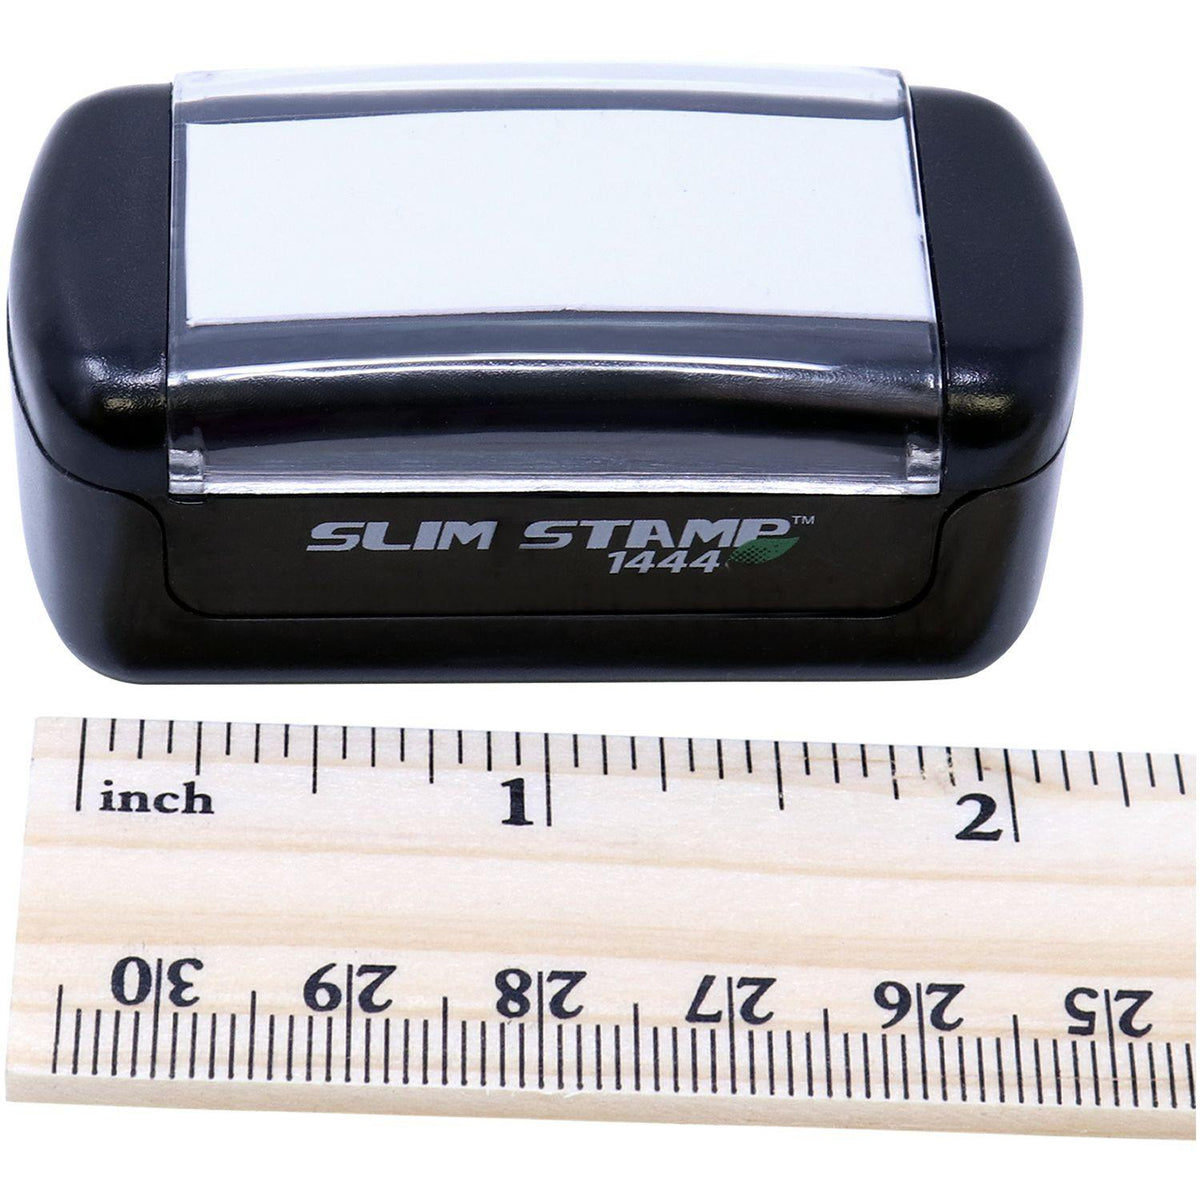 Slim Pre-Inked Bright Idea Stamp - Engineer Seal Stamps - Brand_Slim, Impression Size_Small, Stamp Type_Pre-Inked Stamp, Type of Use_Teacher